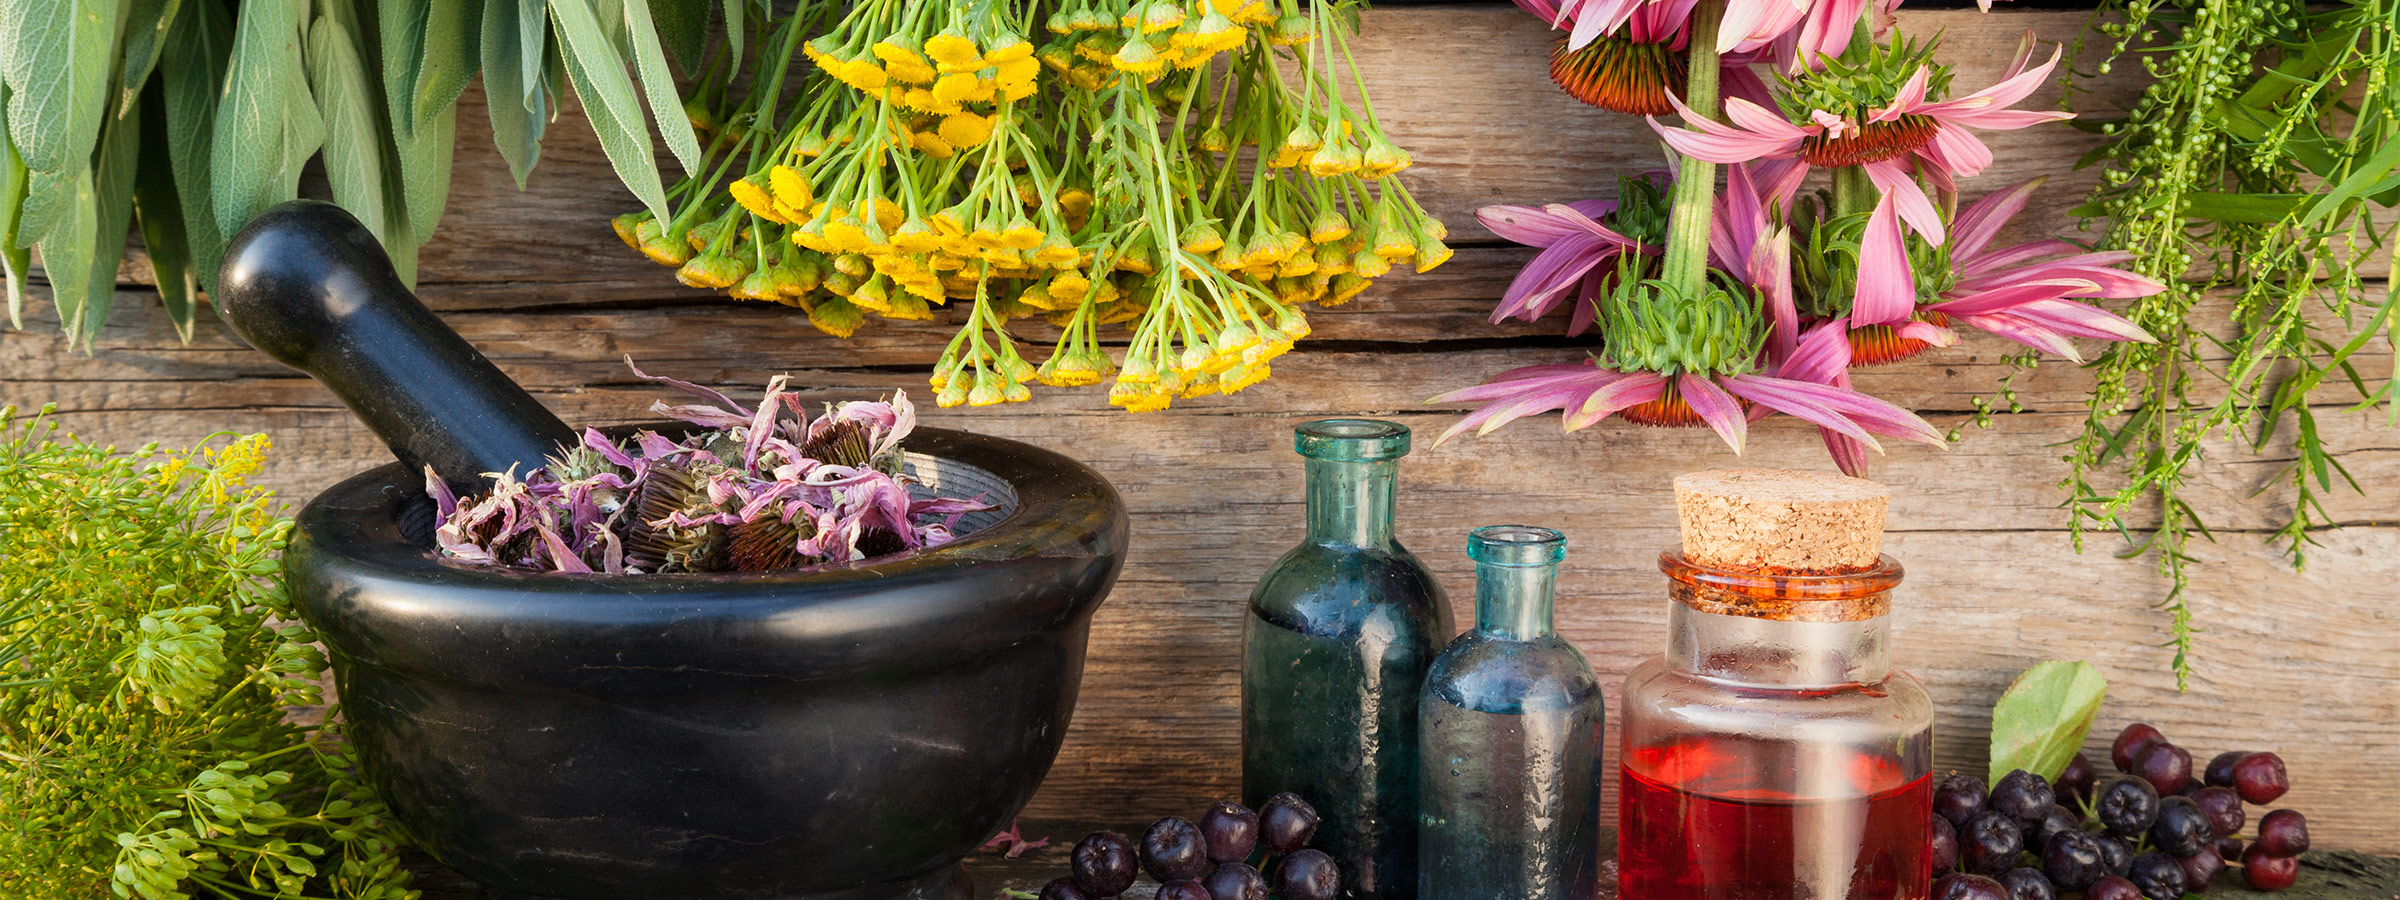 More About Aromatherapy and Essential Oils